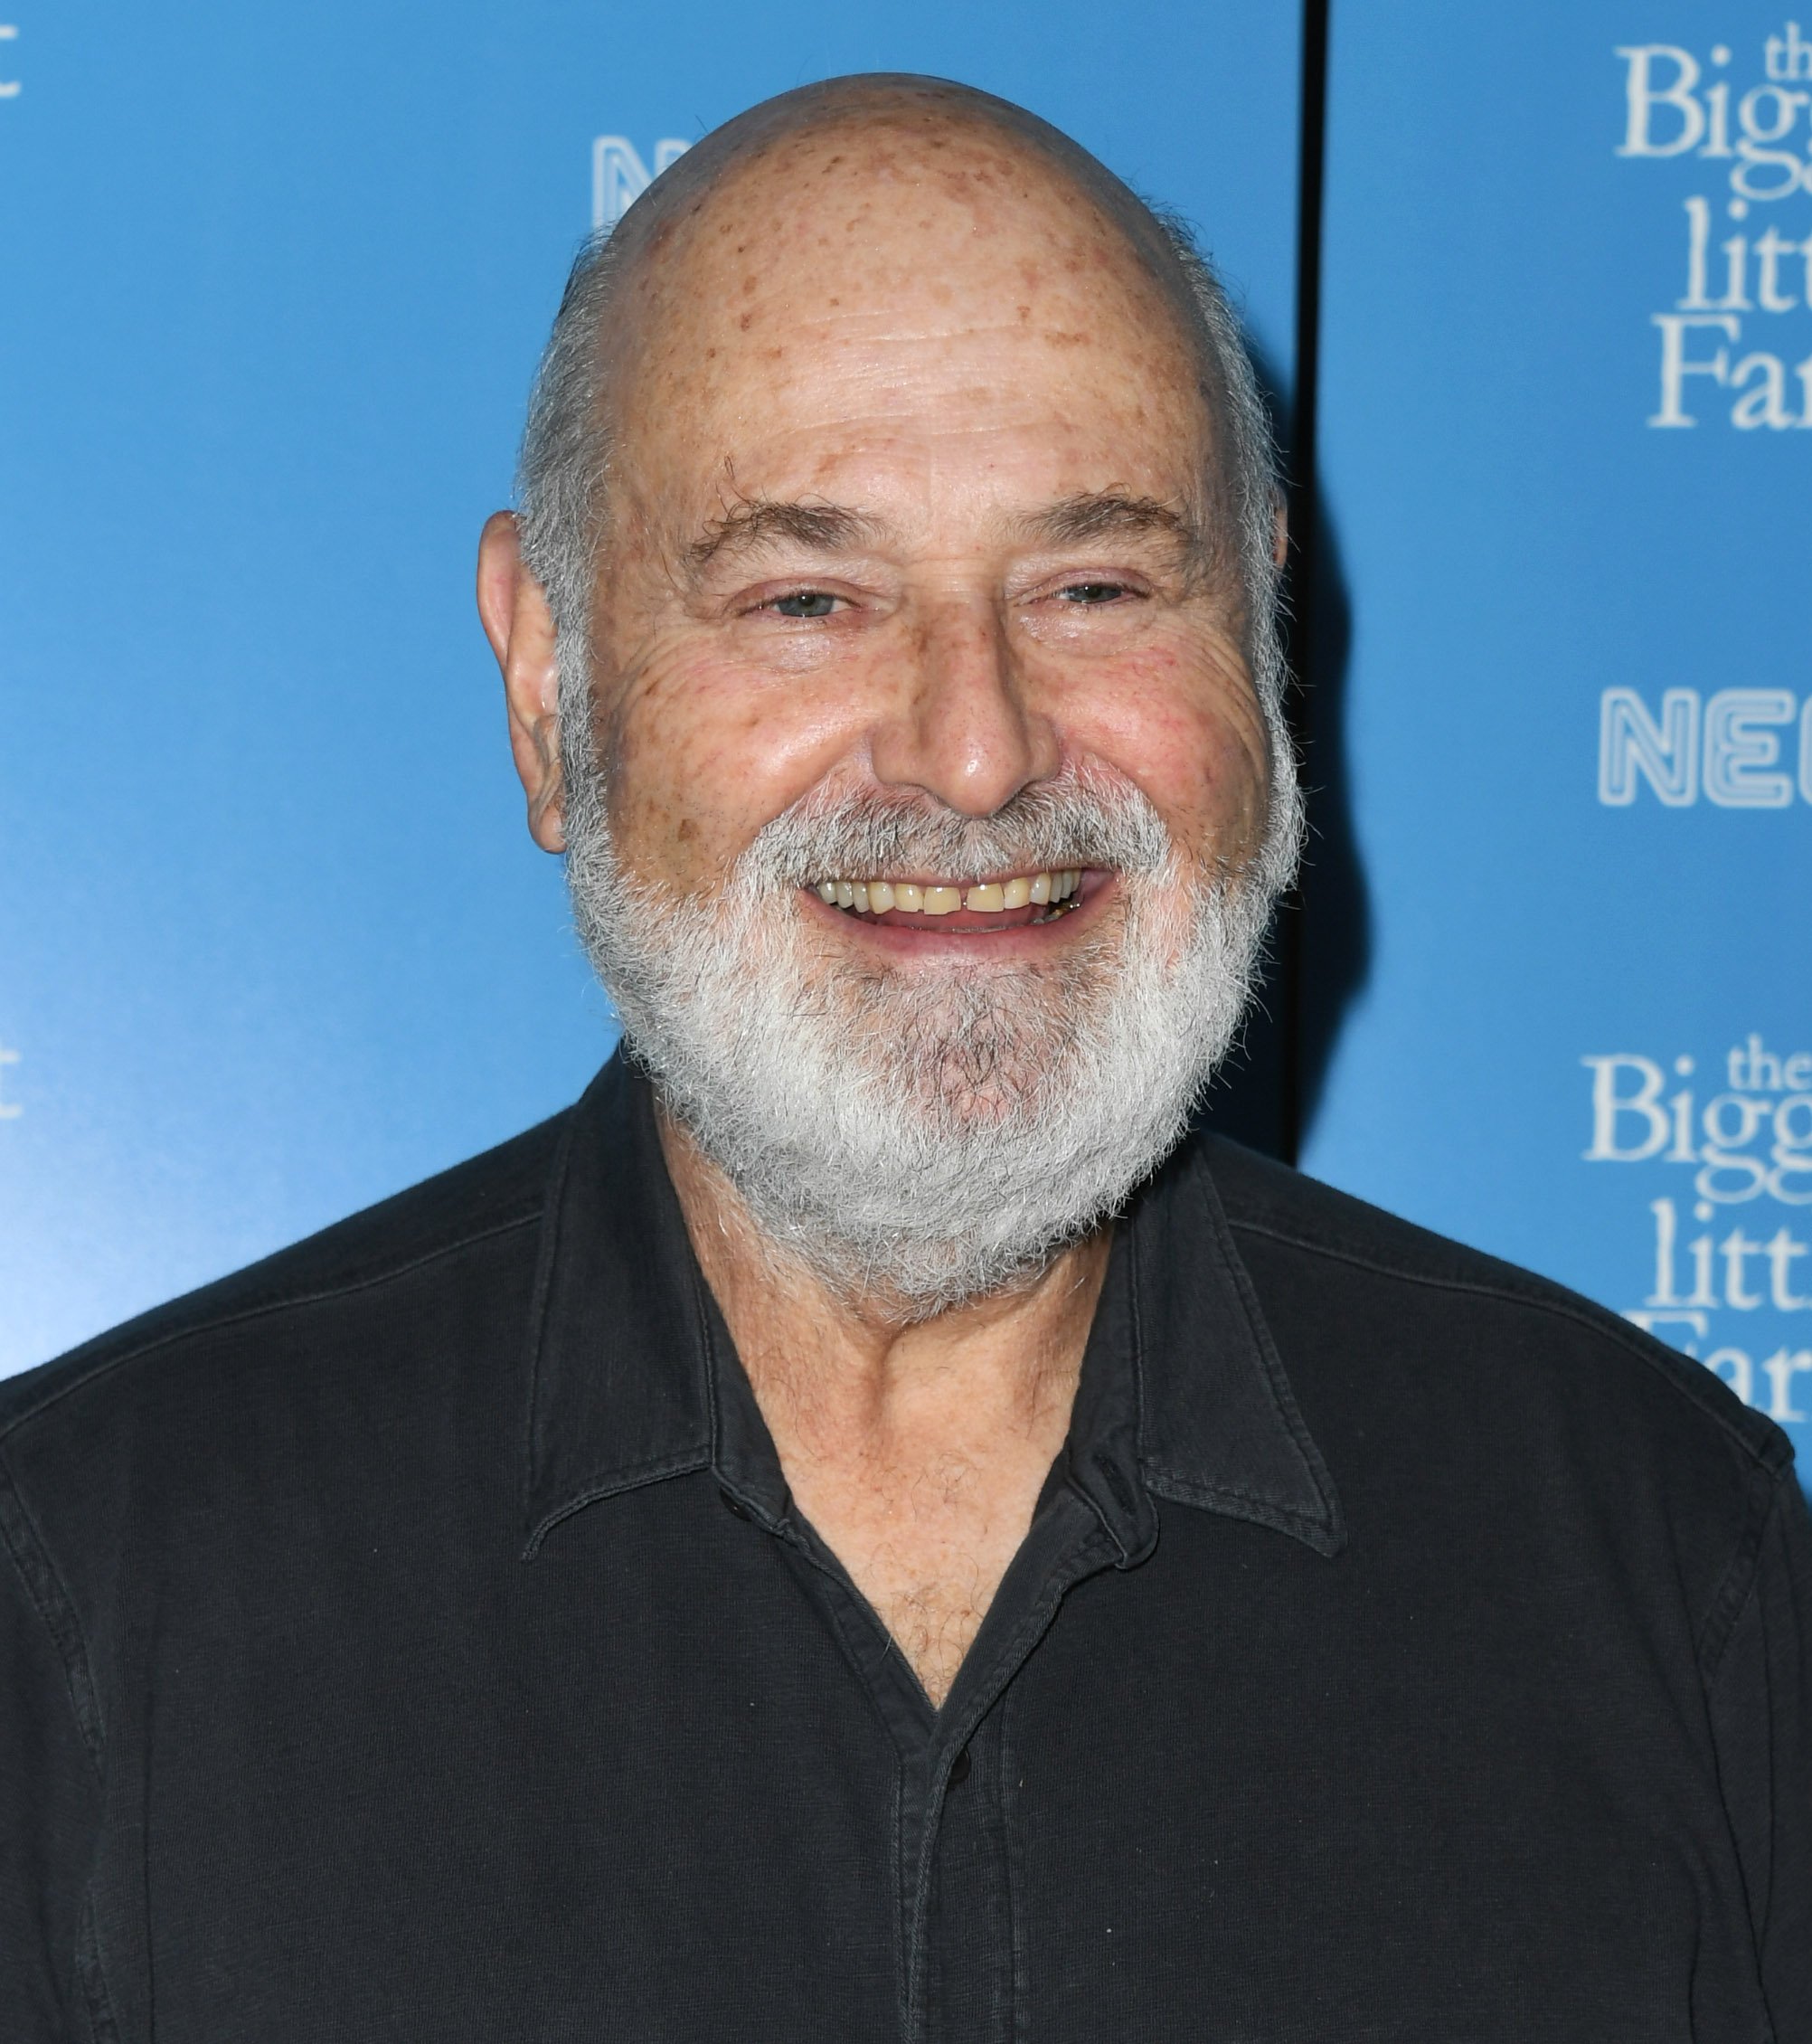 Rob Reiner on red carpet at the premiere of Neon's The Biggest Little Farm in 2019